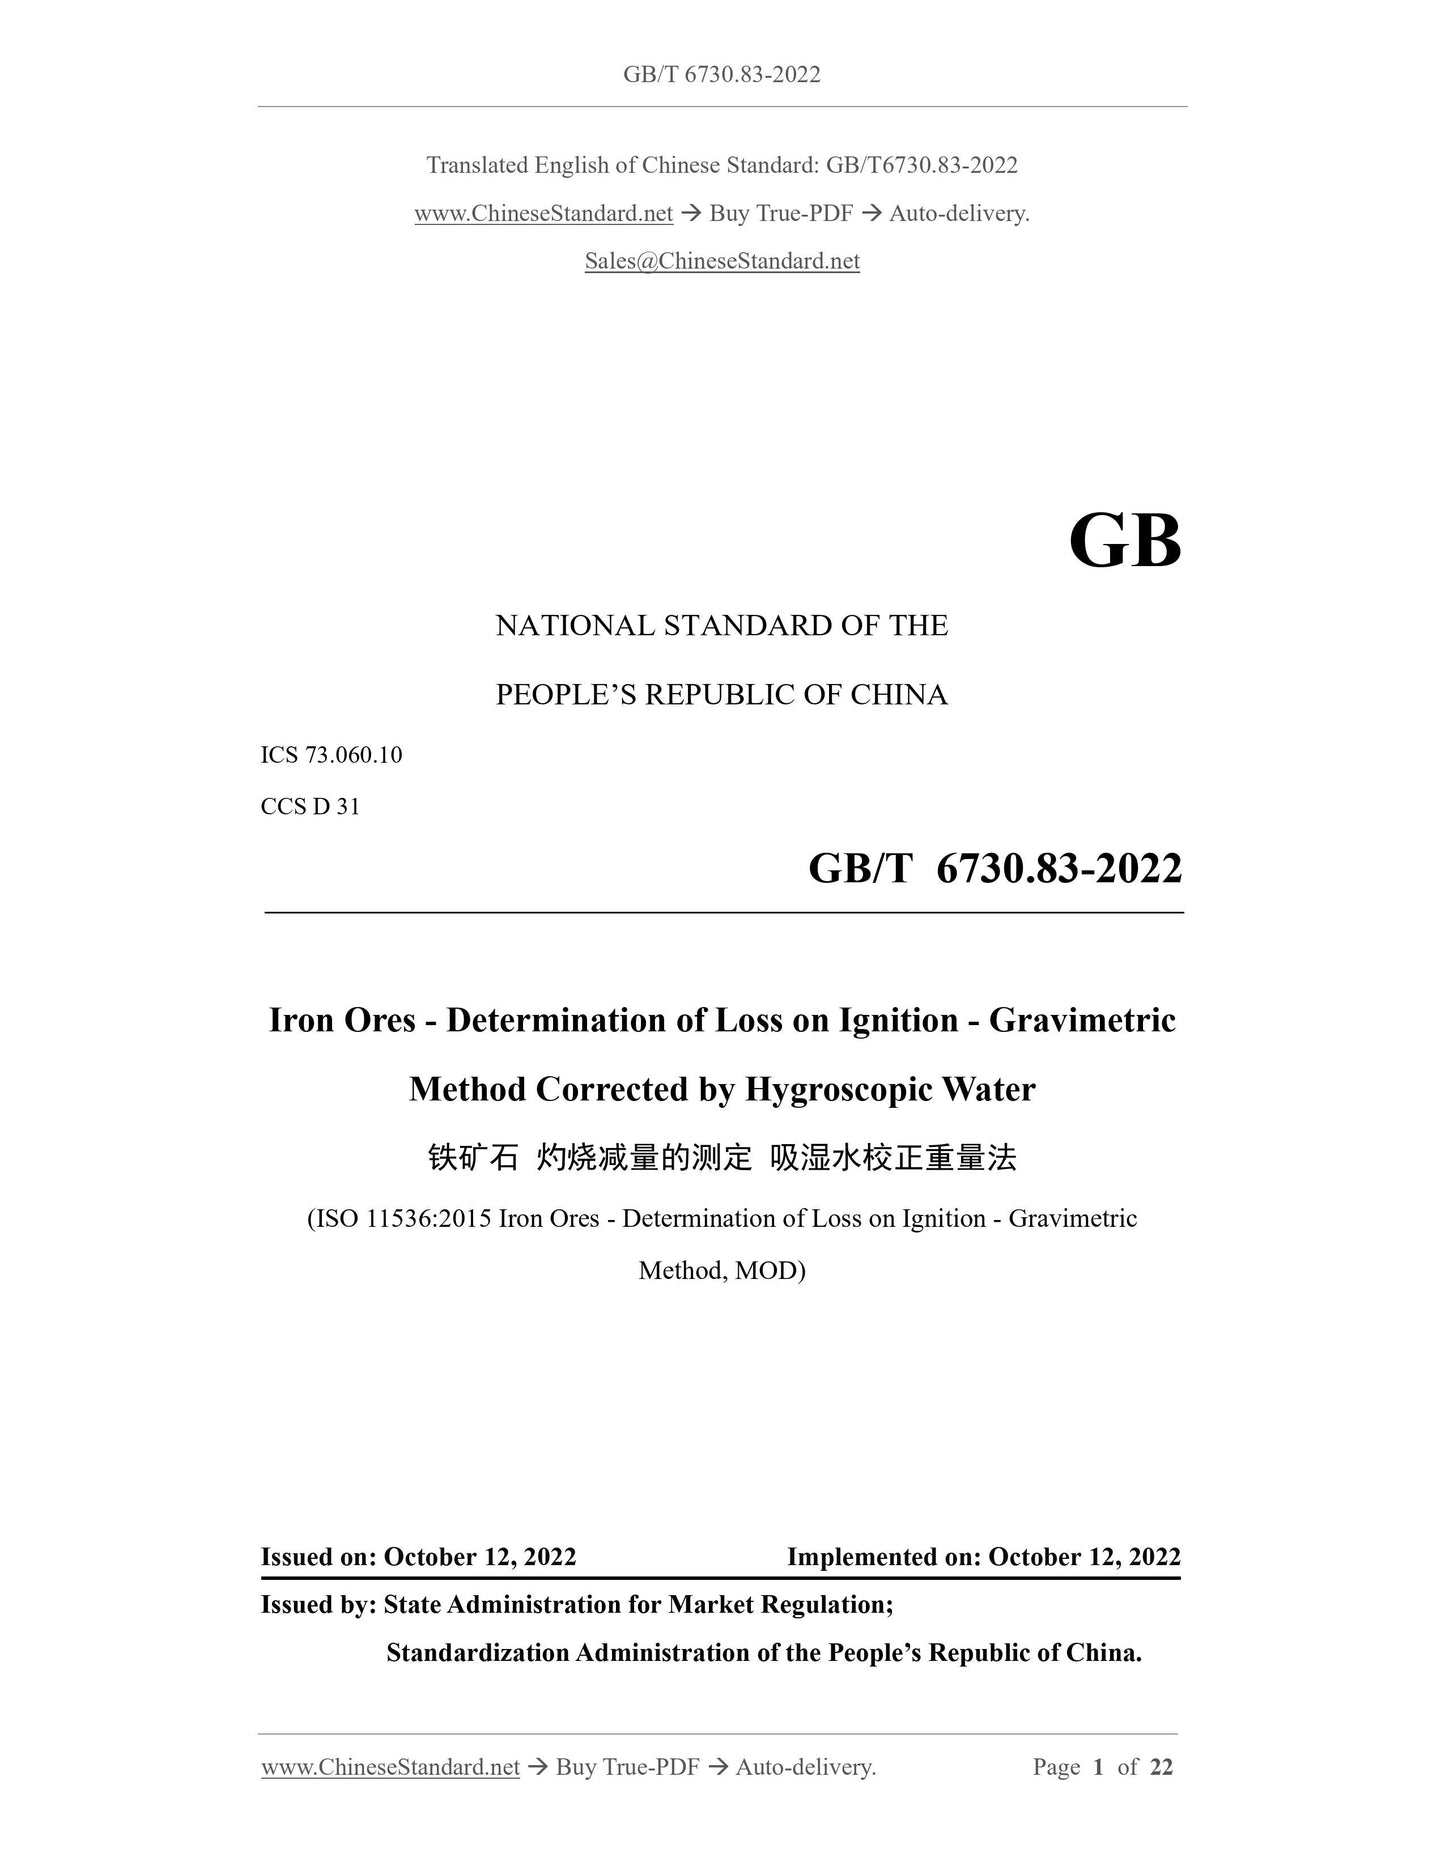 GB/T 6730.83-2022 Page 1